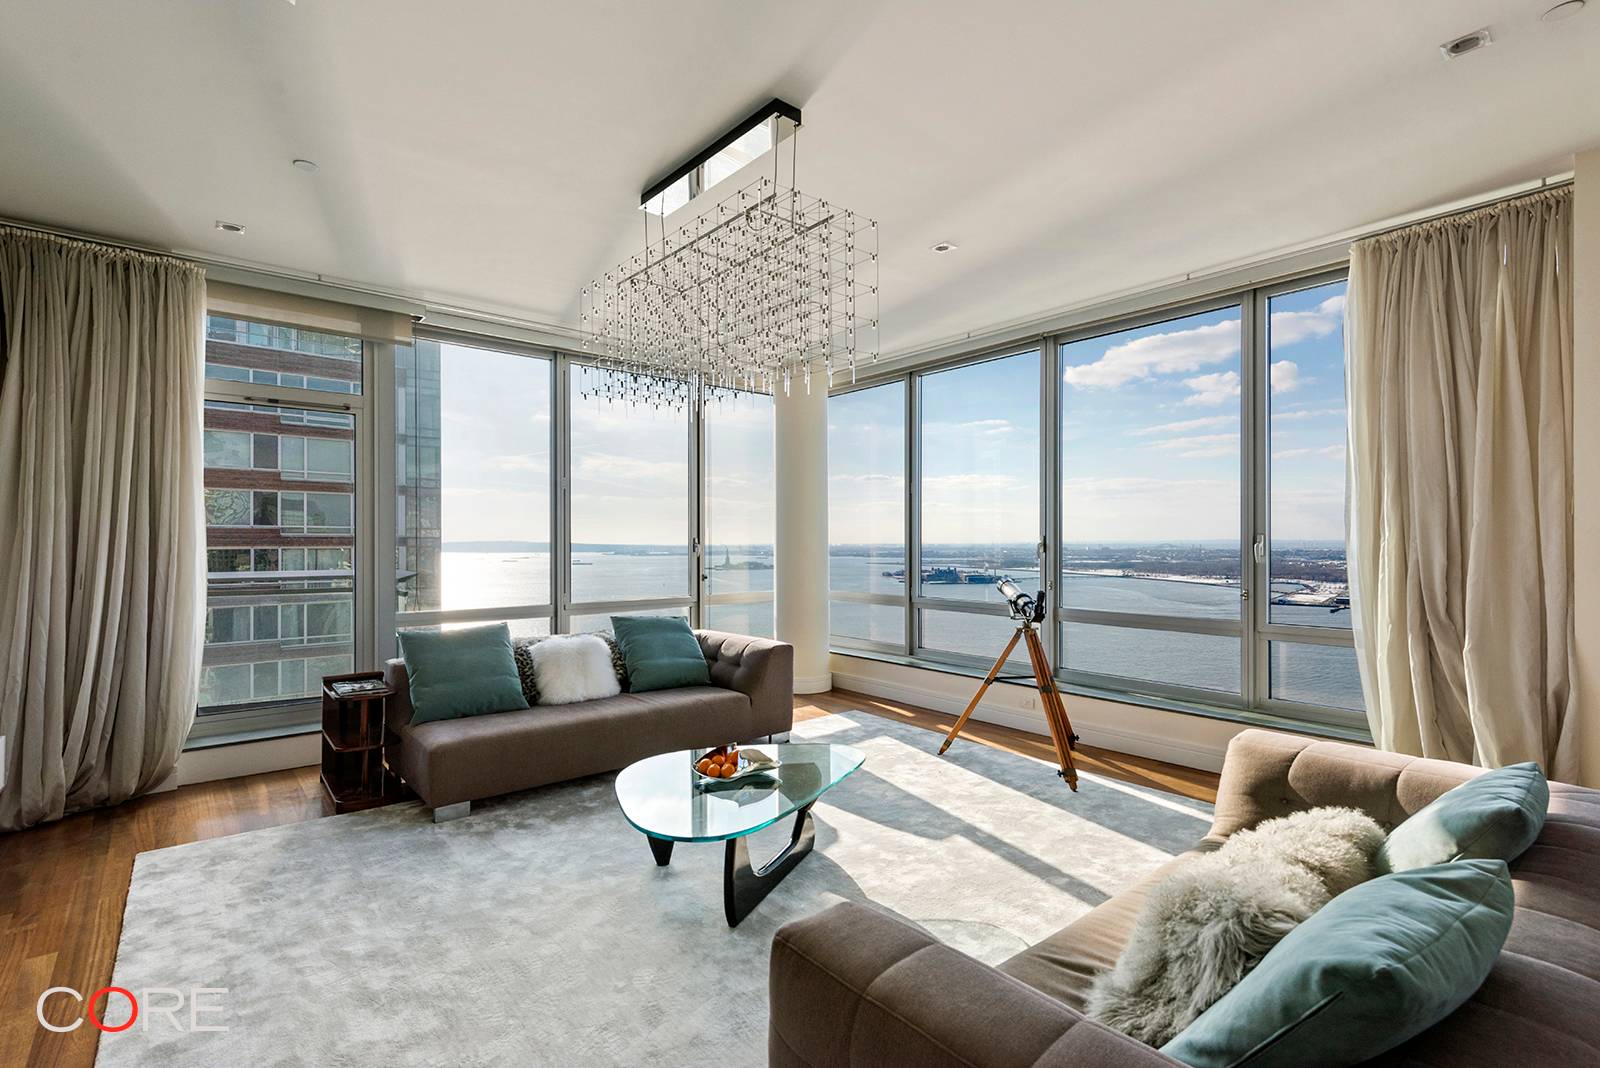 Enjoy life at the top in this top floor southwest facing corner penthouse with spectacular panoramic views of the Hudson River, Statue of Liberty, Governors Island, and New York Harbor.